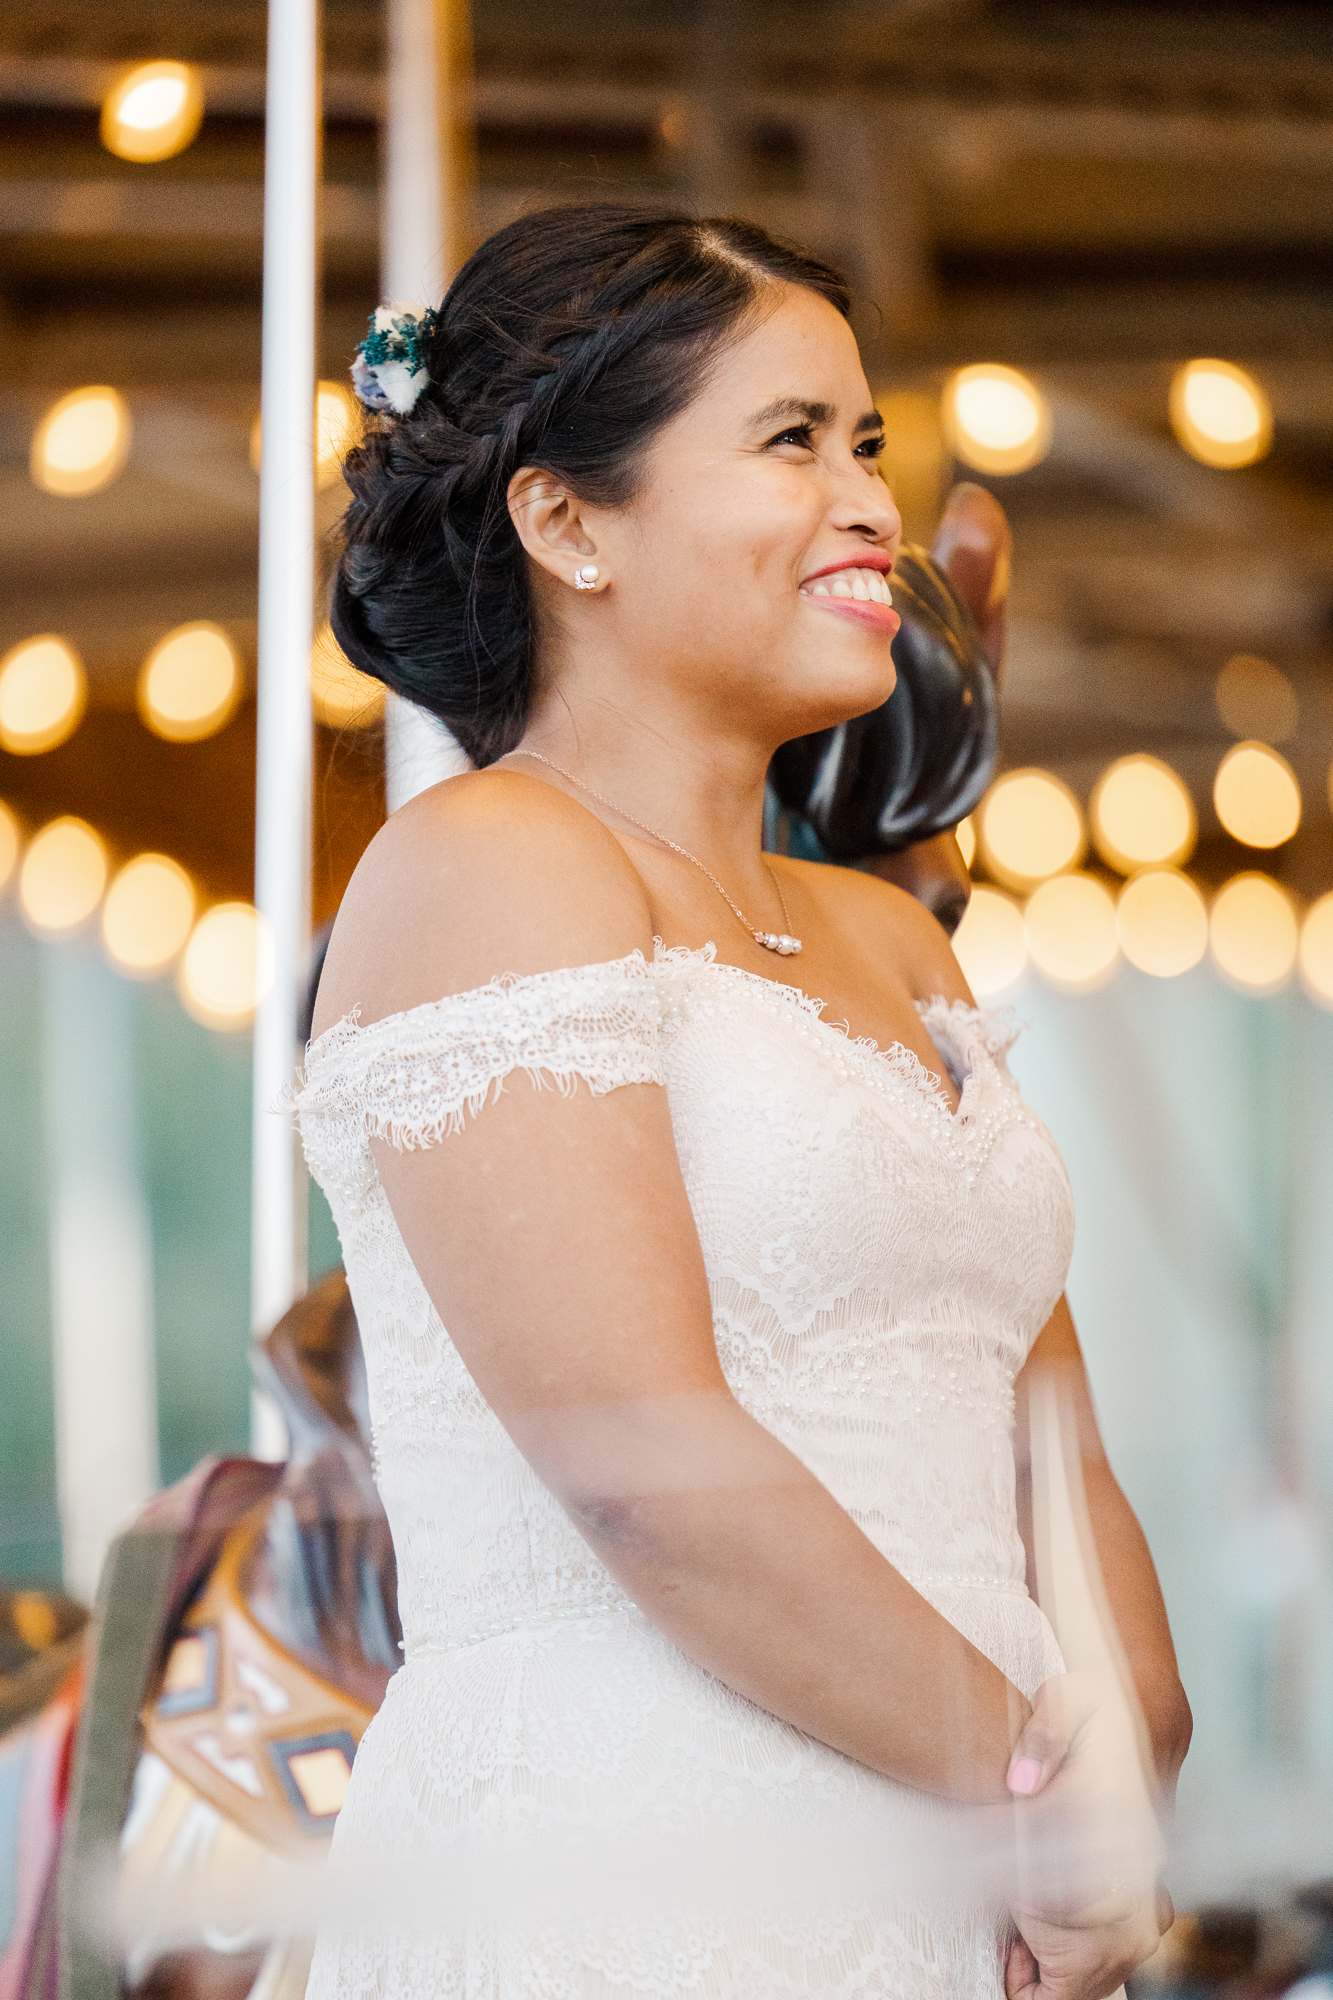 Cheerful Jane's Carousel Elopement at Sunset